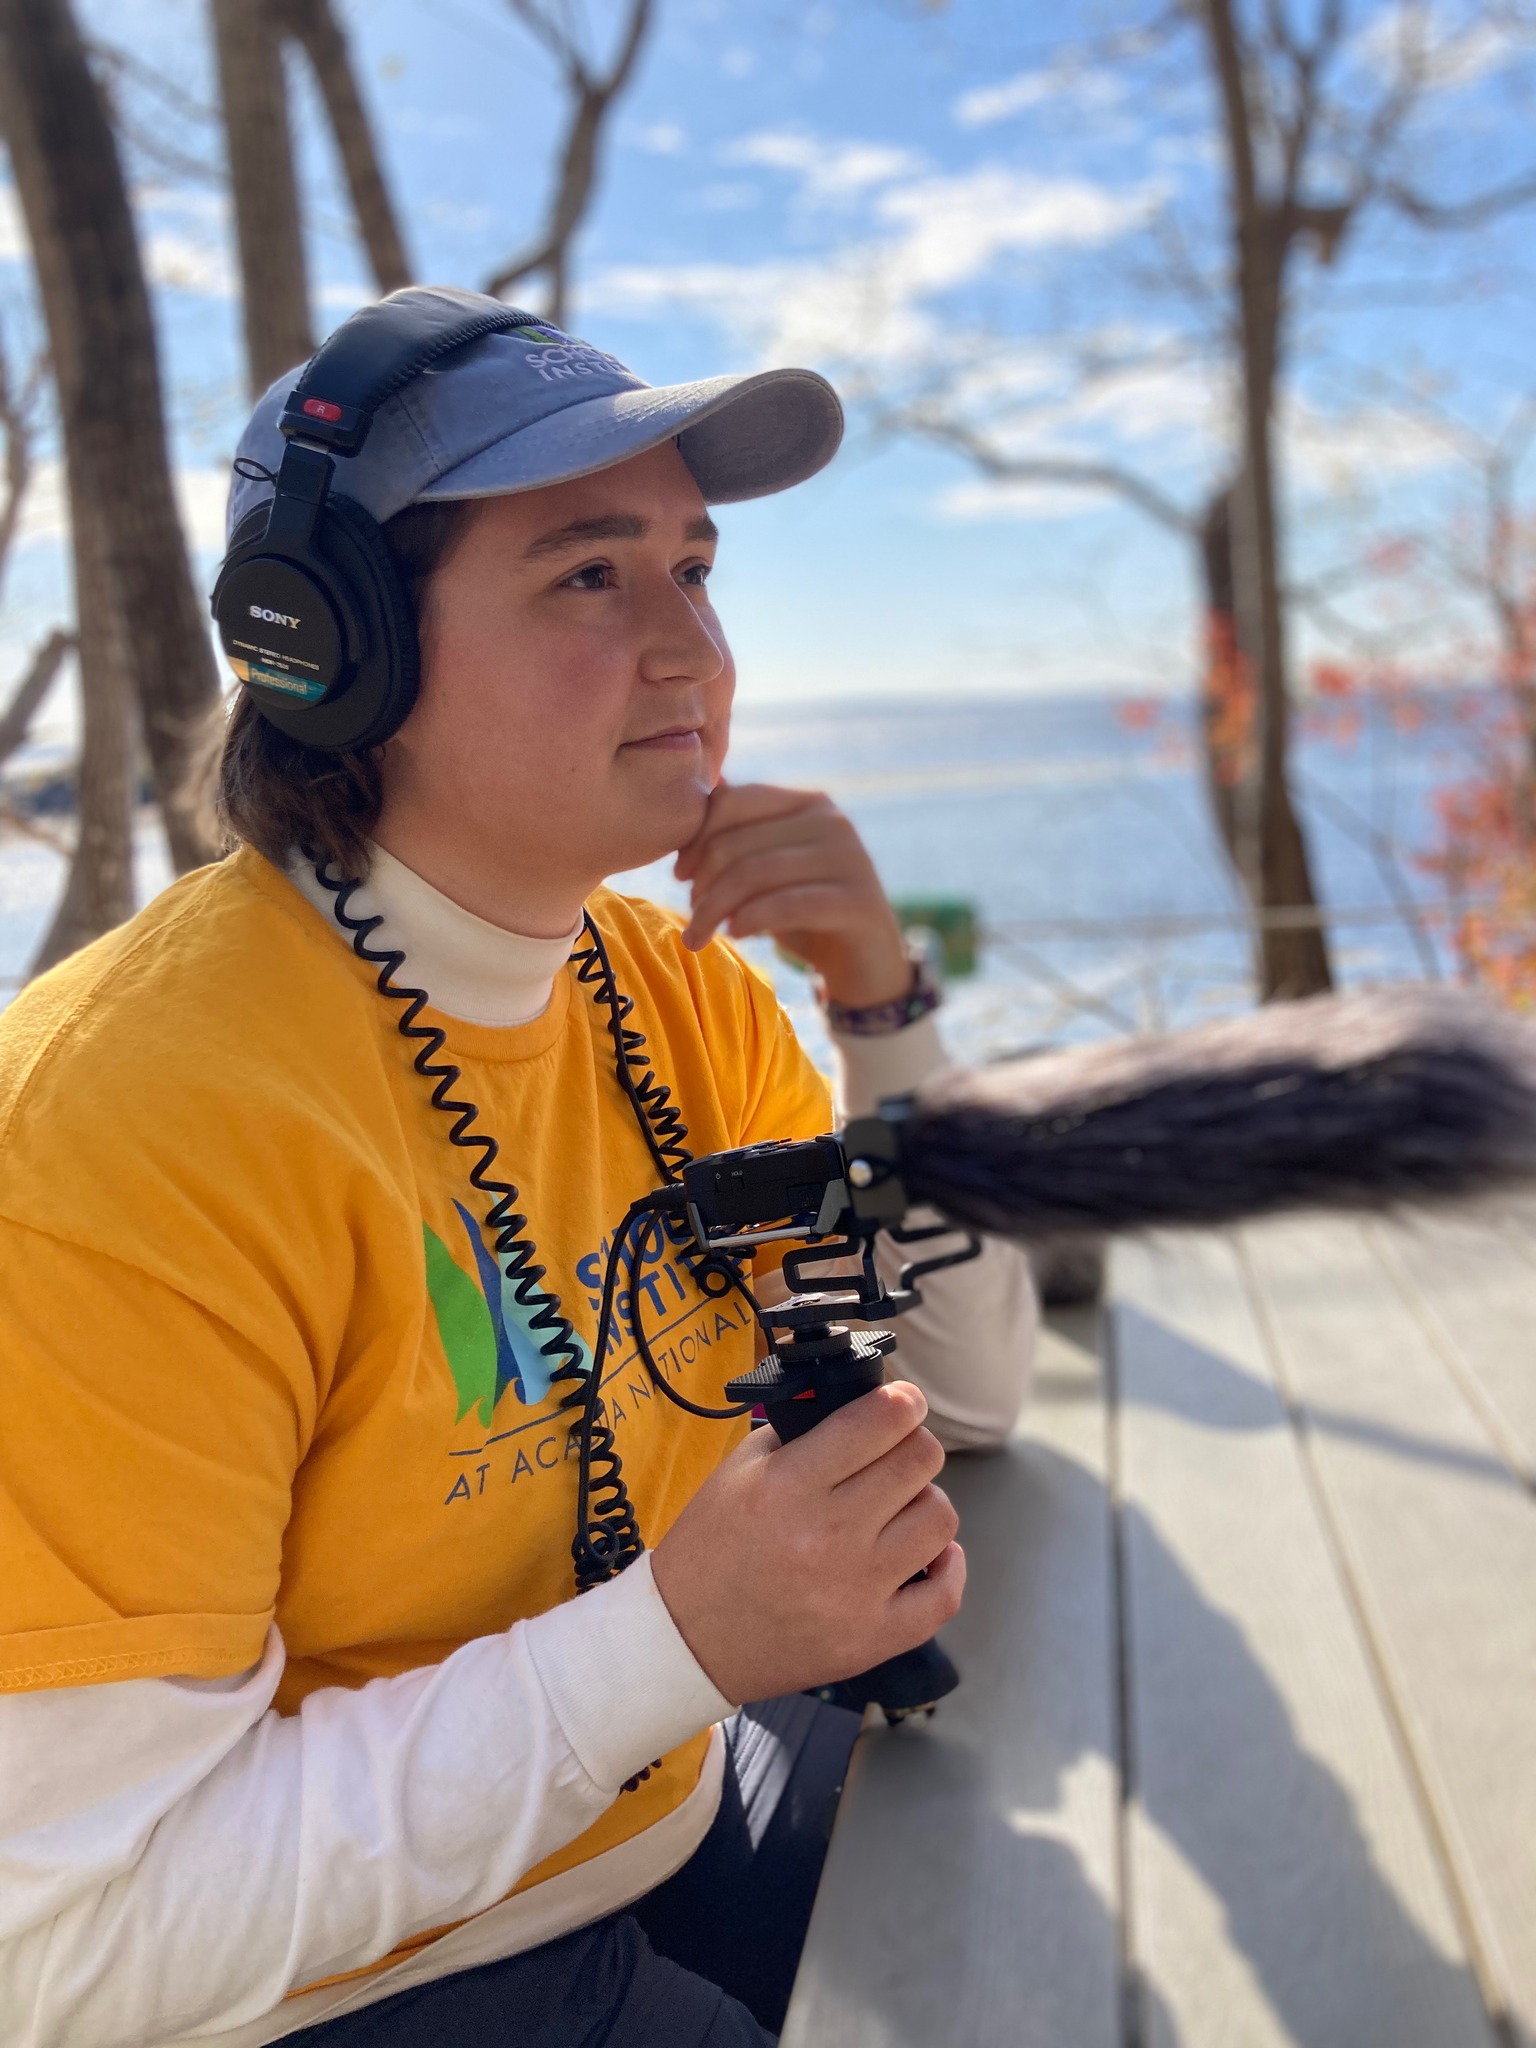 Olivia Milloway sits at an outside picnic table with podcast equipment as she interviews a podcast guest. The ocean can be seen behind her, under a bright blue sky.